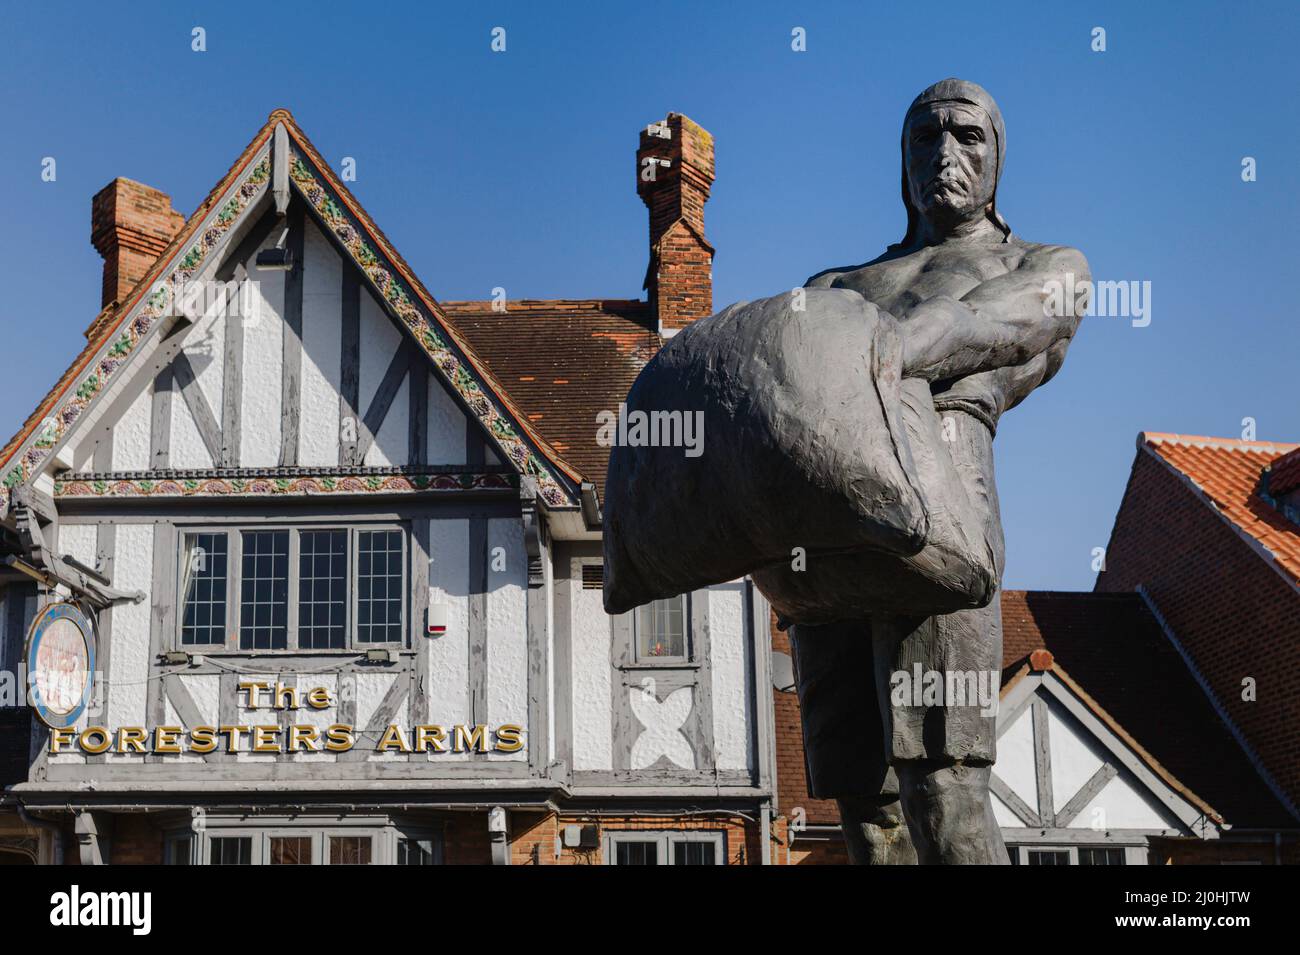 Statue of creeler, a historical labourer employed to move loaded bags from barges, and view of Foresters Arms, public house, Beverley, UK. Stock Photo